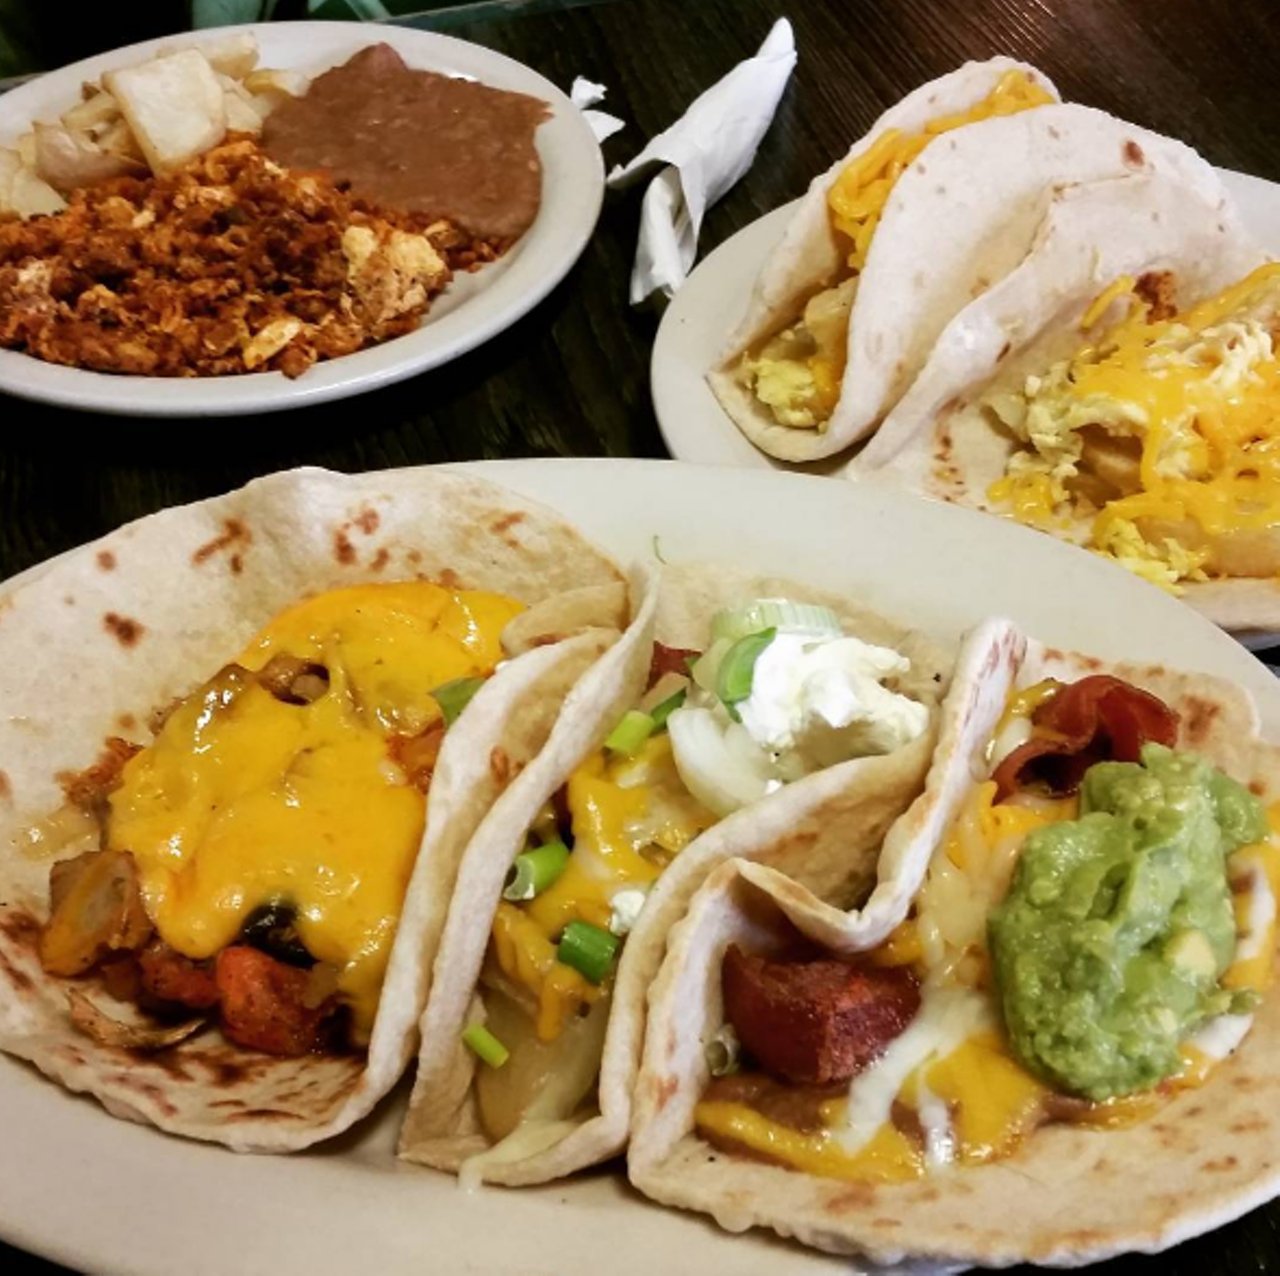 Torres Taco Haven
1032 S Presa St, (210) 533-2171
Play your cards right, and you can grab both dinnerand a margarita for $15 at Torres Taco Haven.
Photo via Instagram/carmonafortexas